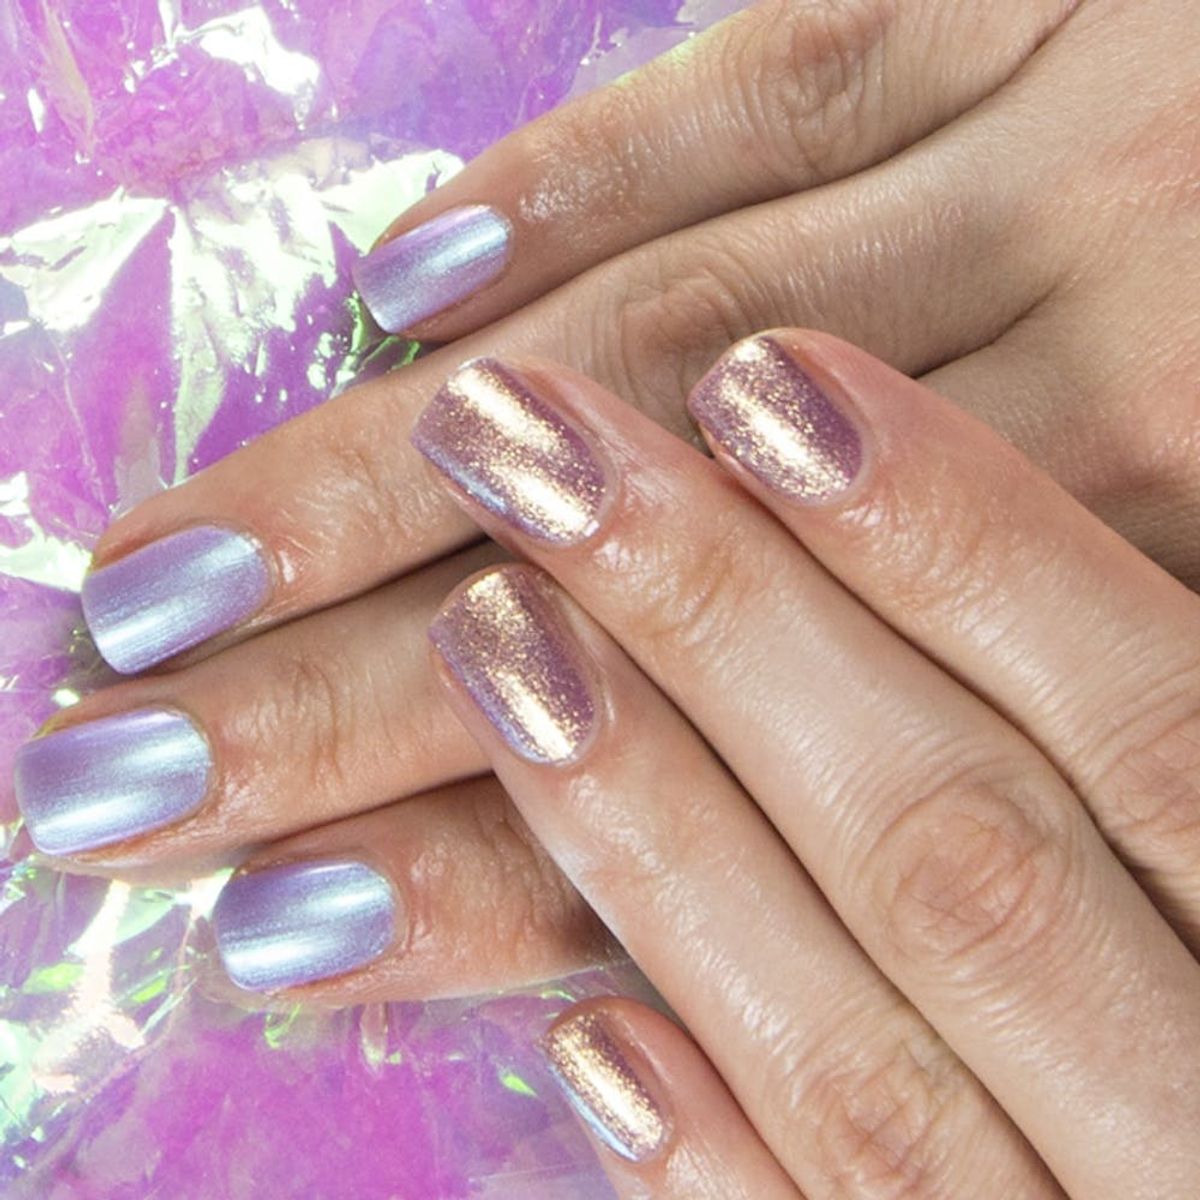 Now Your Nails Can Sparkle Like a Unicorn